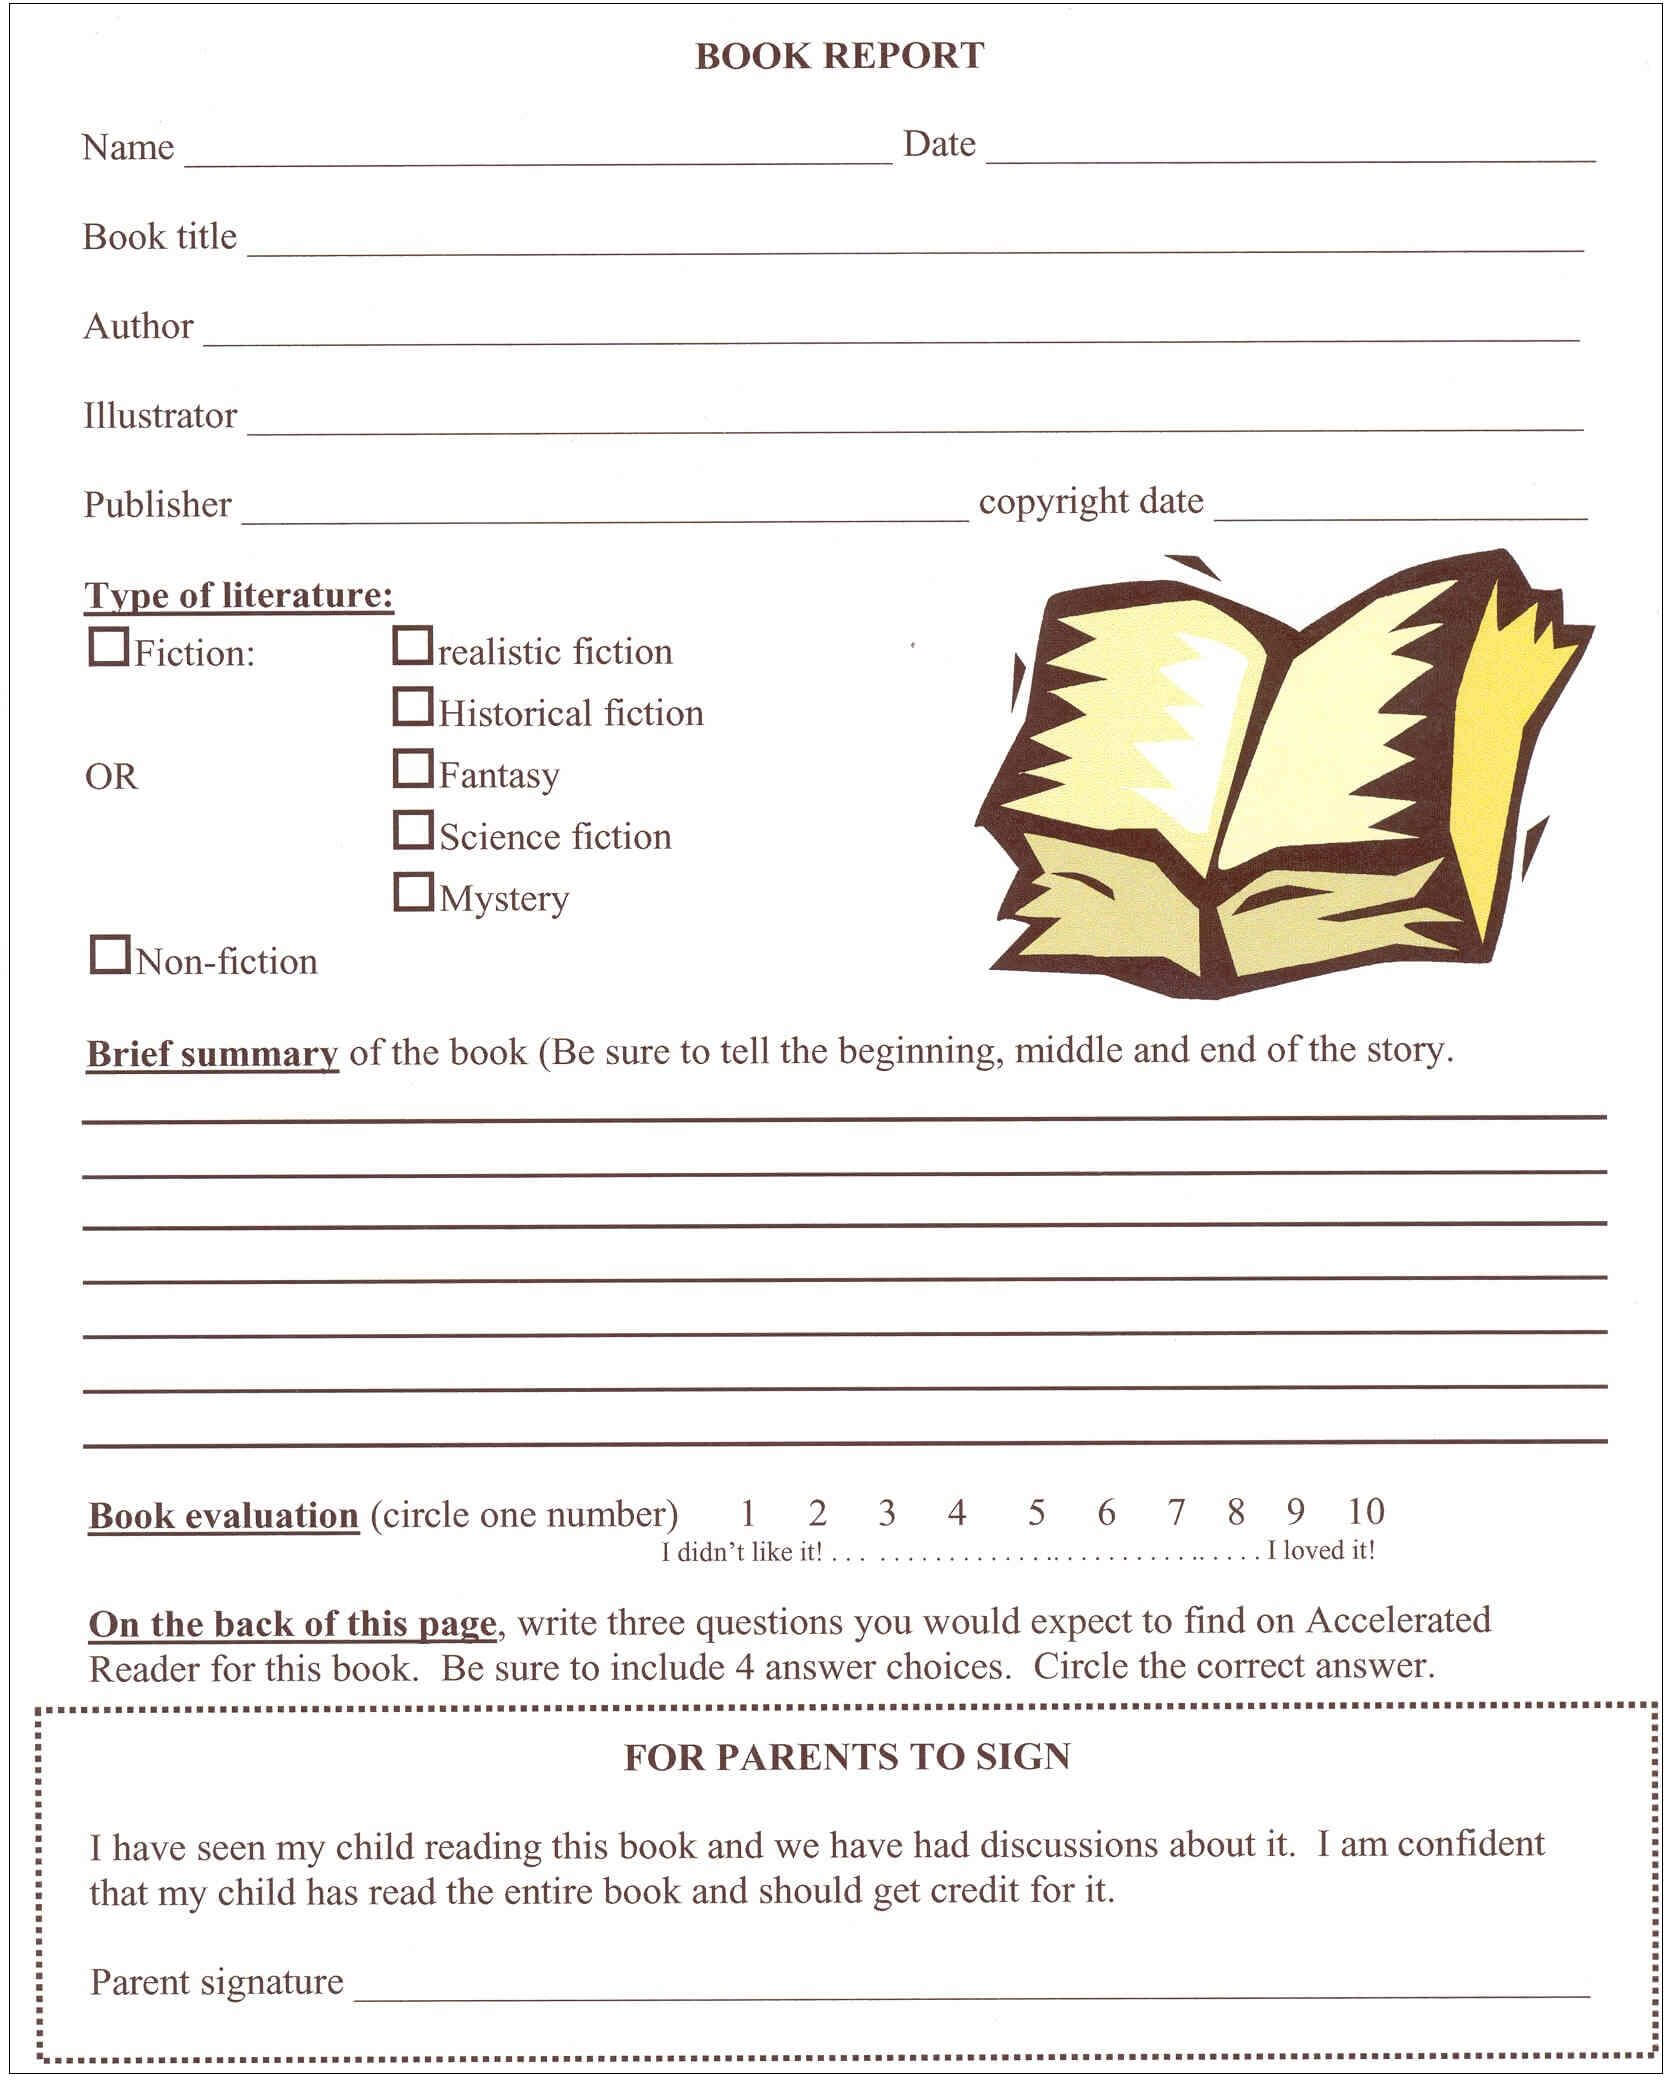 Image Result For 6Th Grade Book Report Format | Get For Ar Report Template